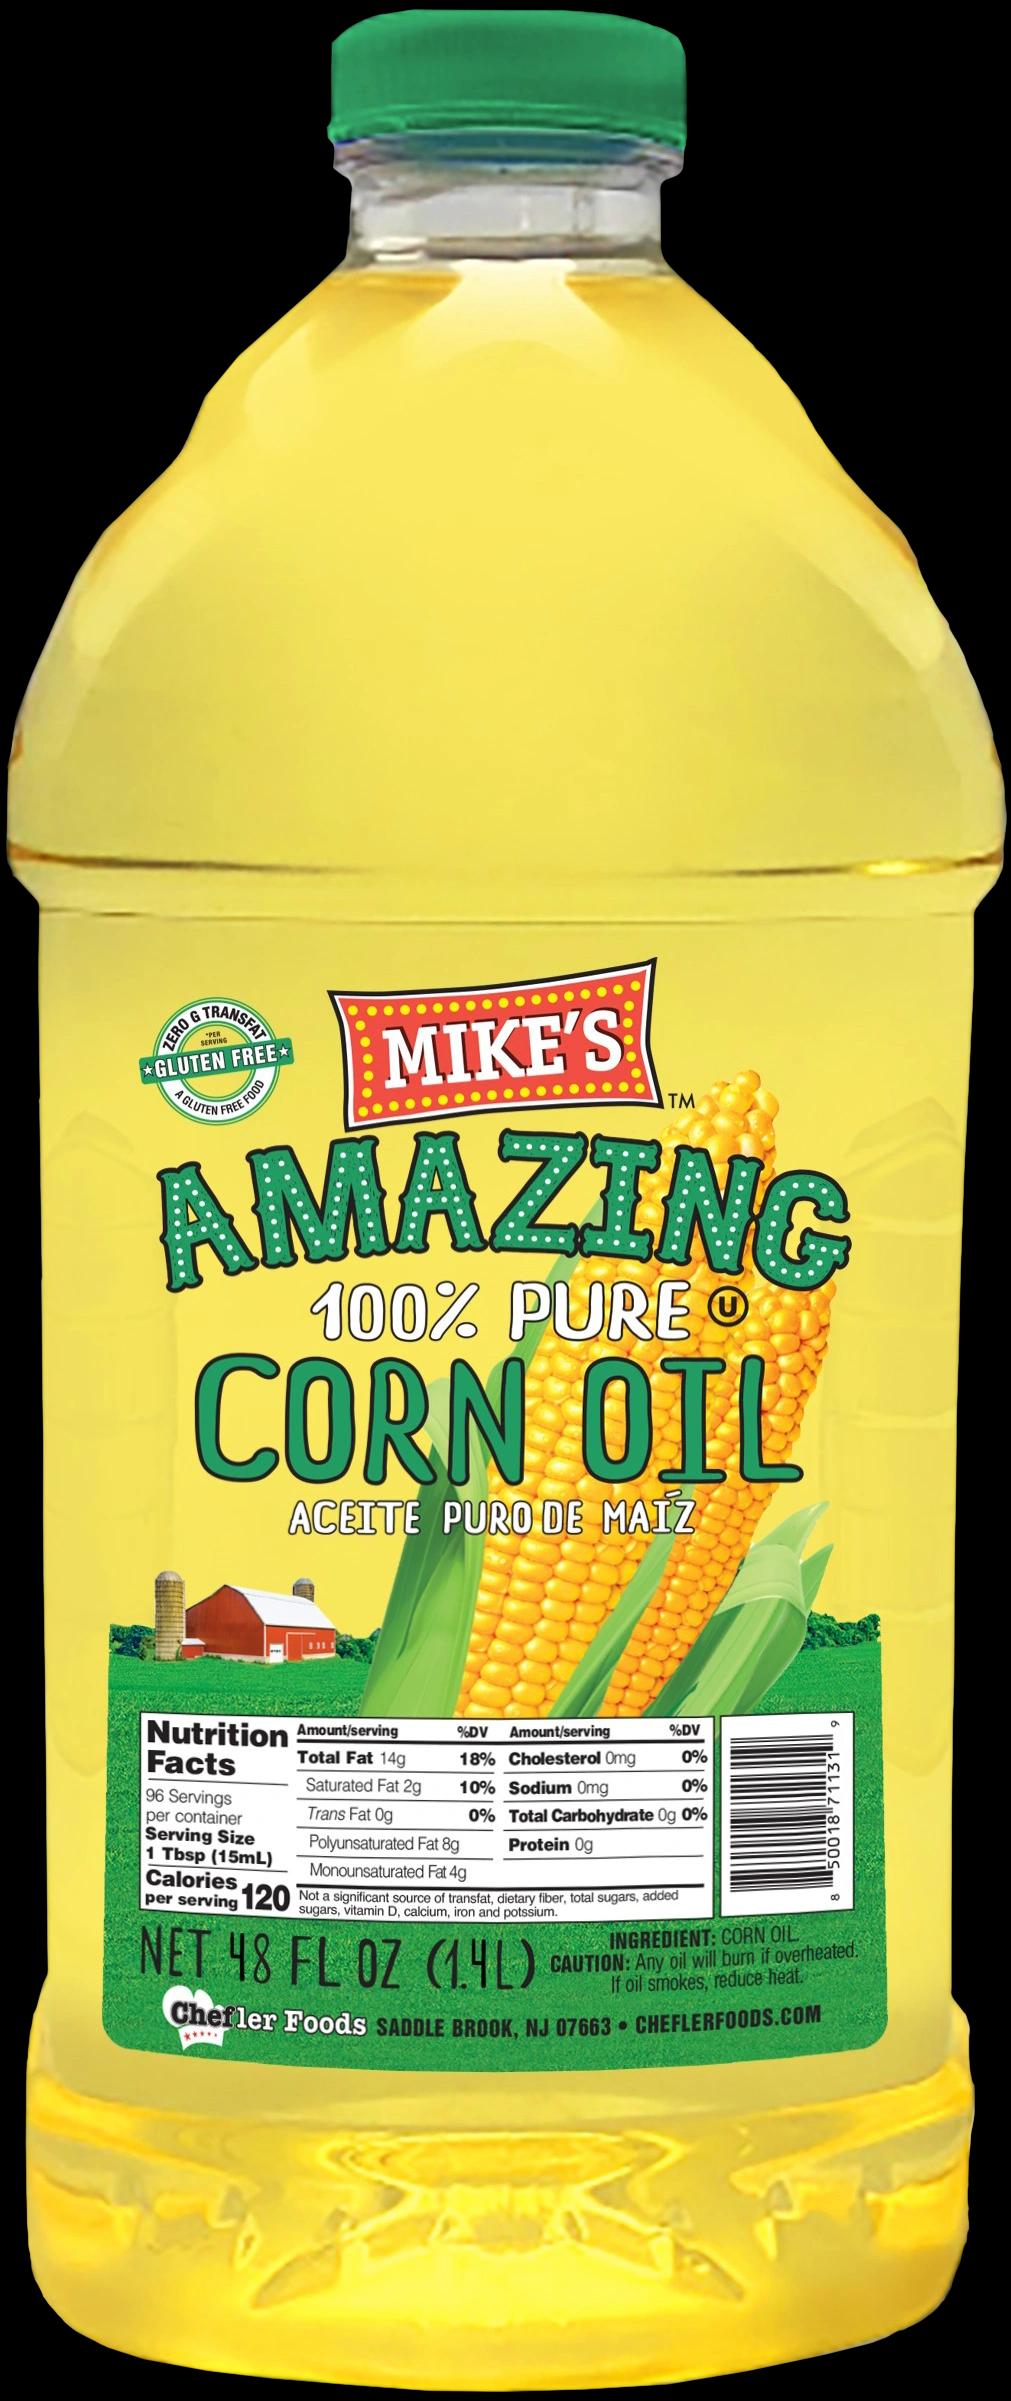 A 48oz bottle of Mike's Amazing corn oil.